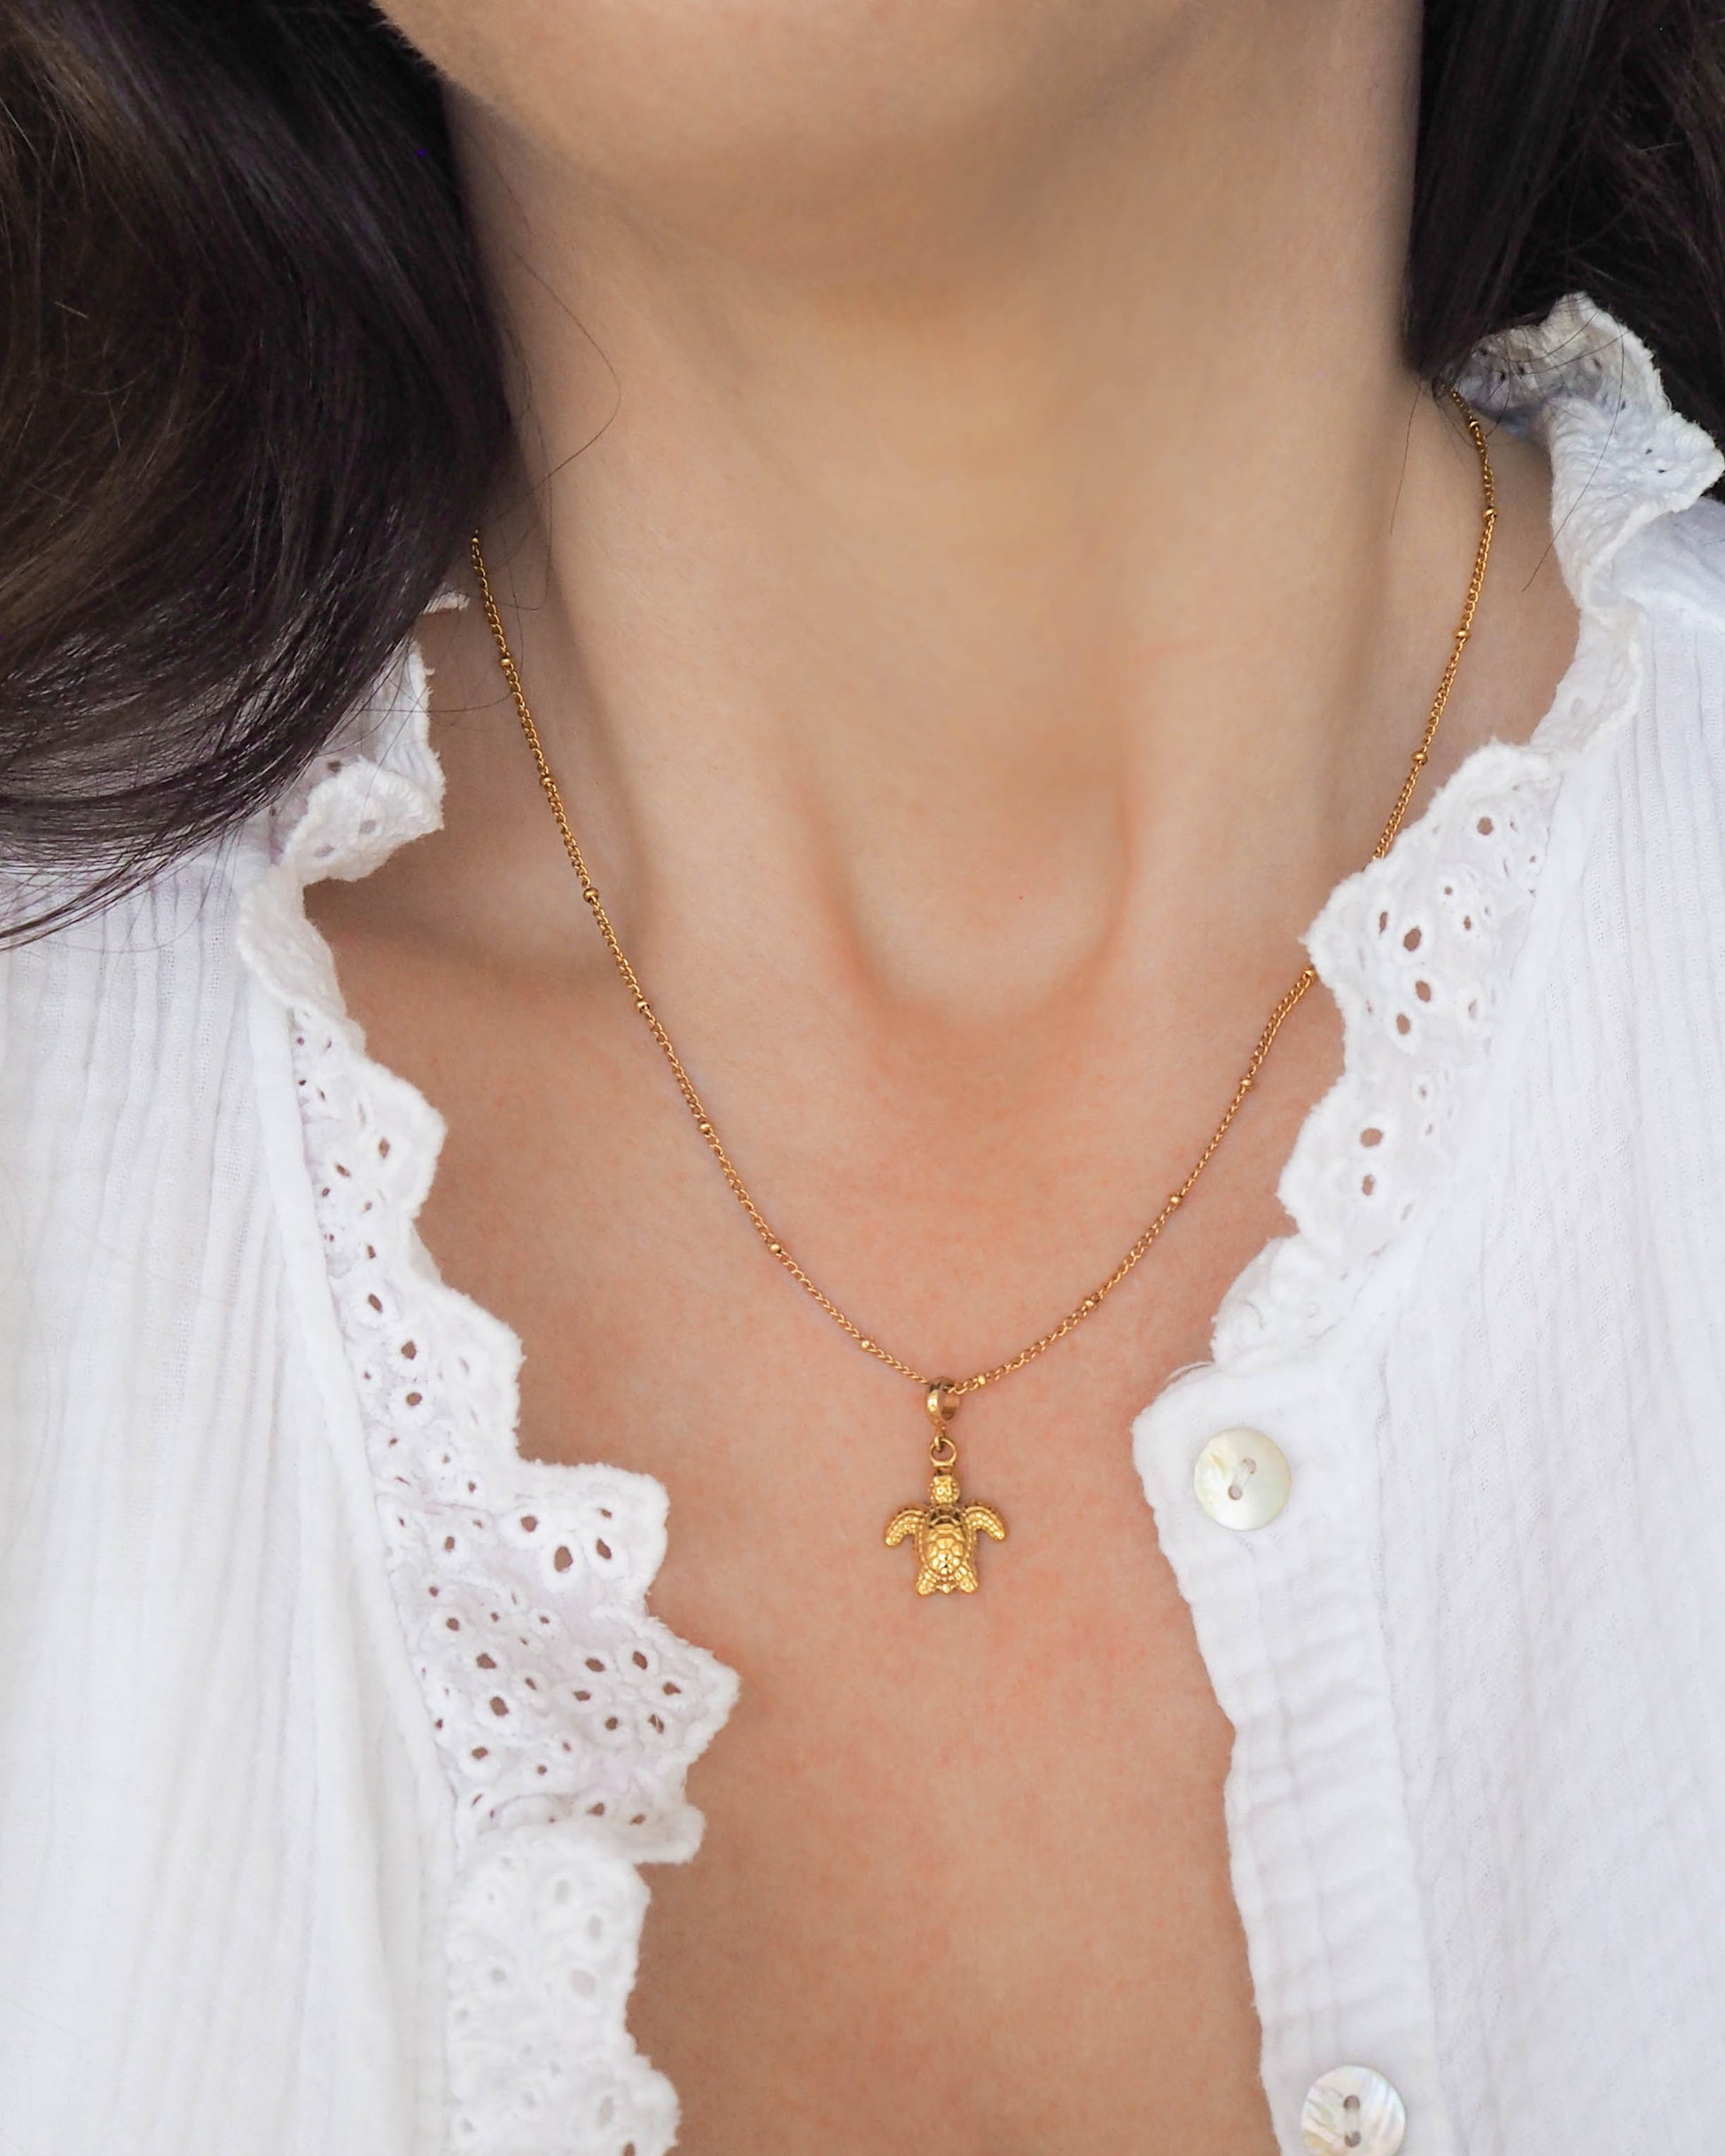 Gold Stainless Steel Necklace with Turtle Pendant - Ocean-Inspired Jewelry, Sea by Lou, Seabylou